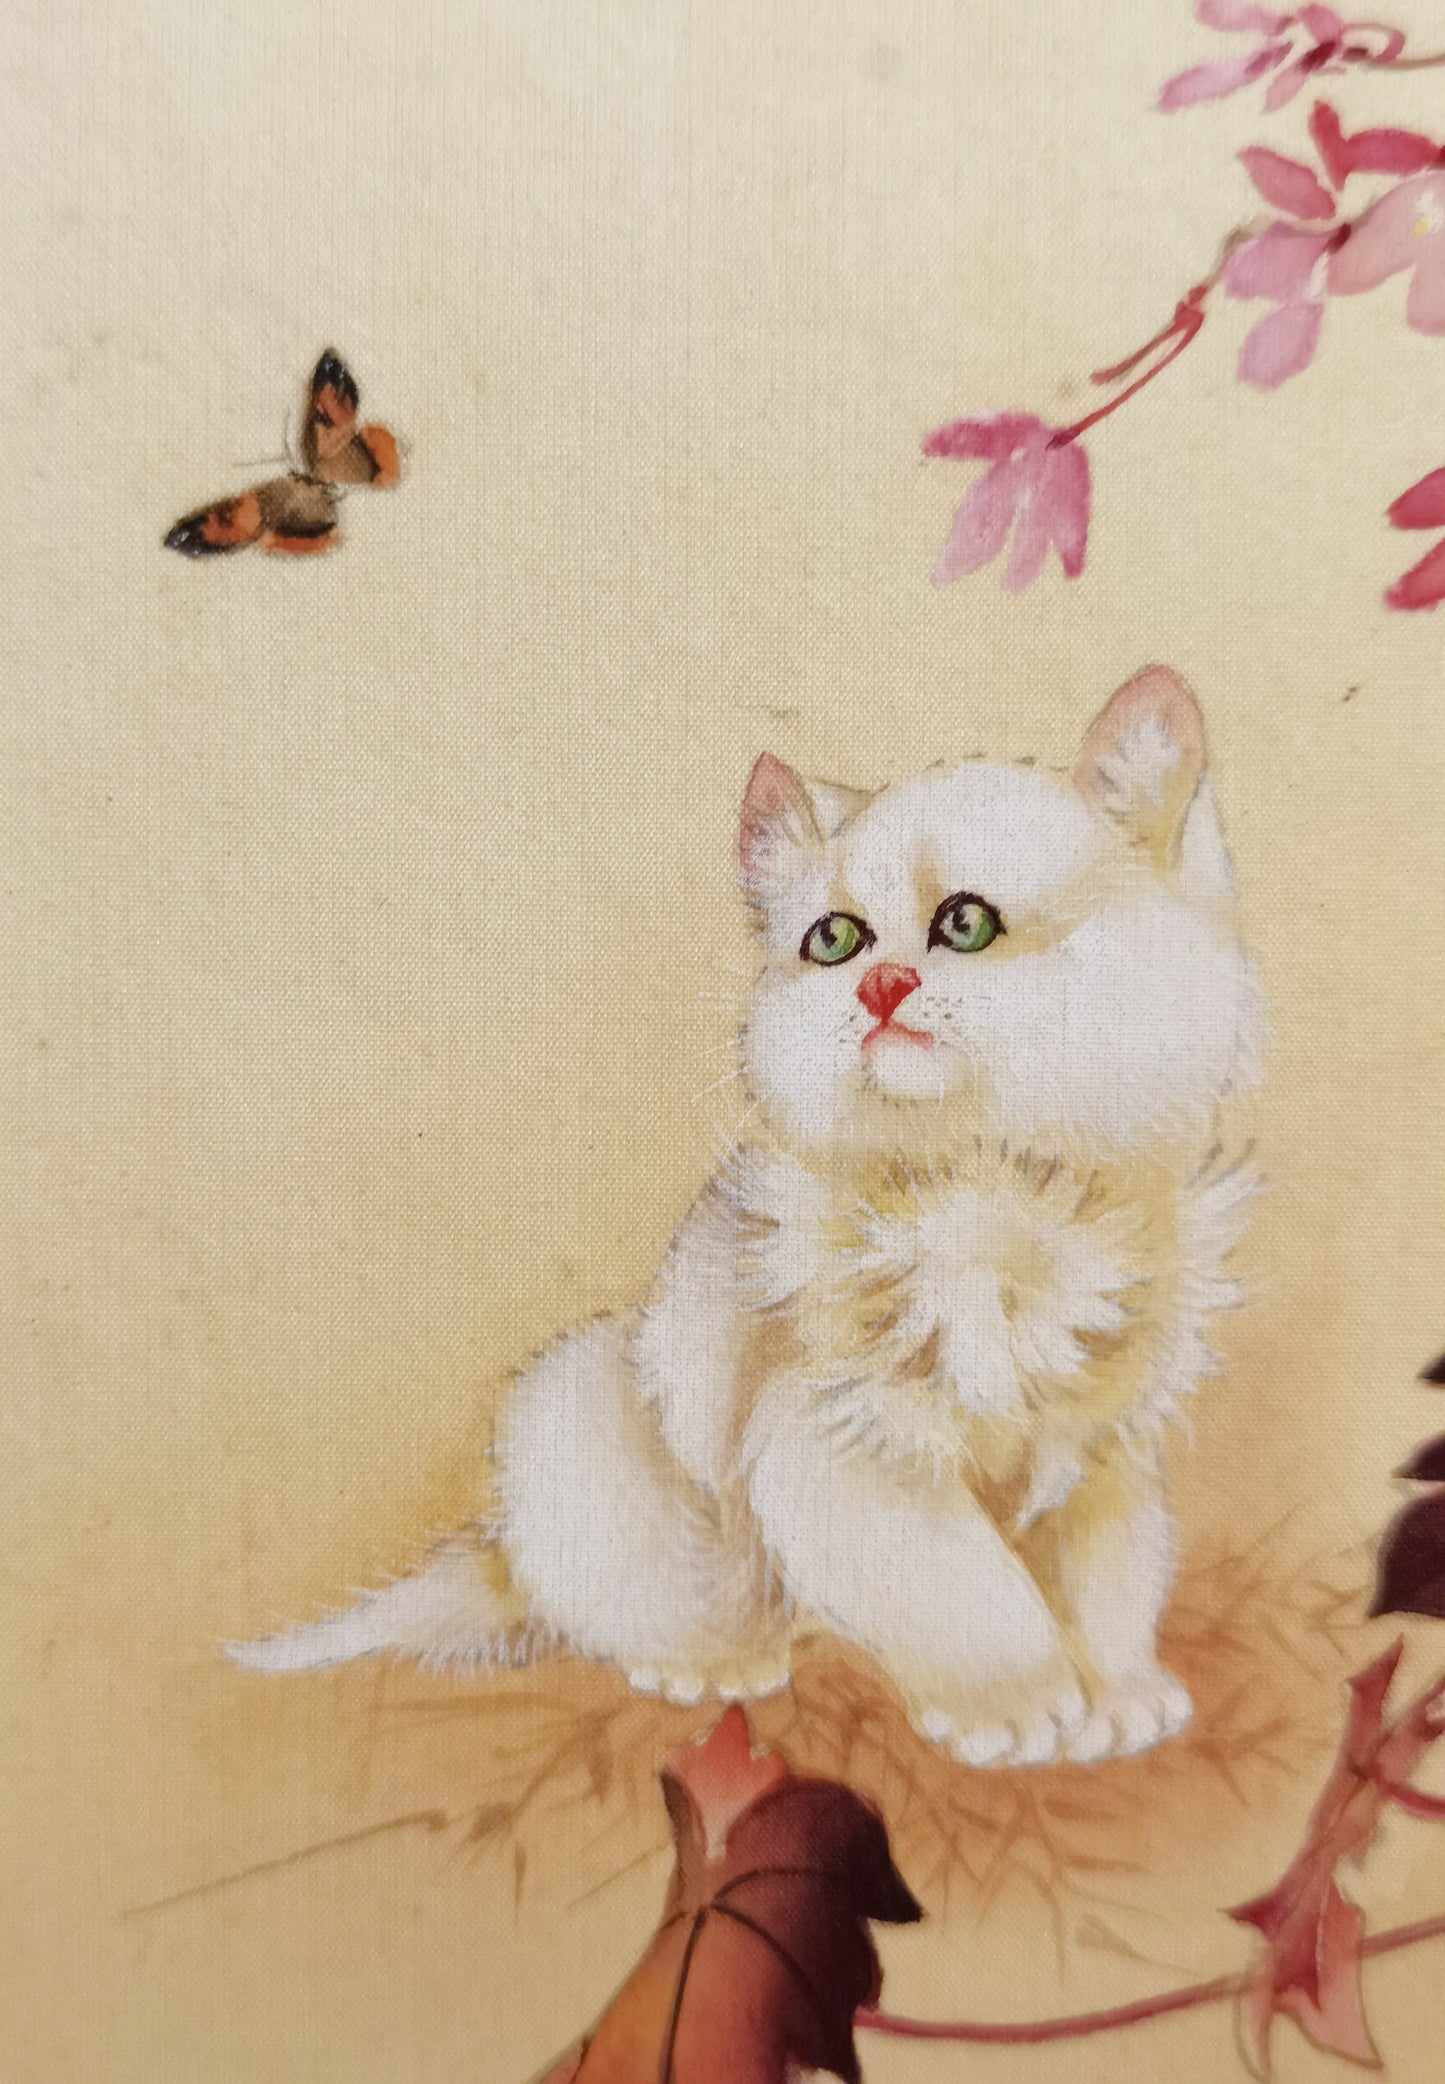 White Cat & Butterflies Perception Handmade Art Printing Animal Insects Plants Cute and Silly with Wood Frame